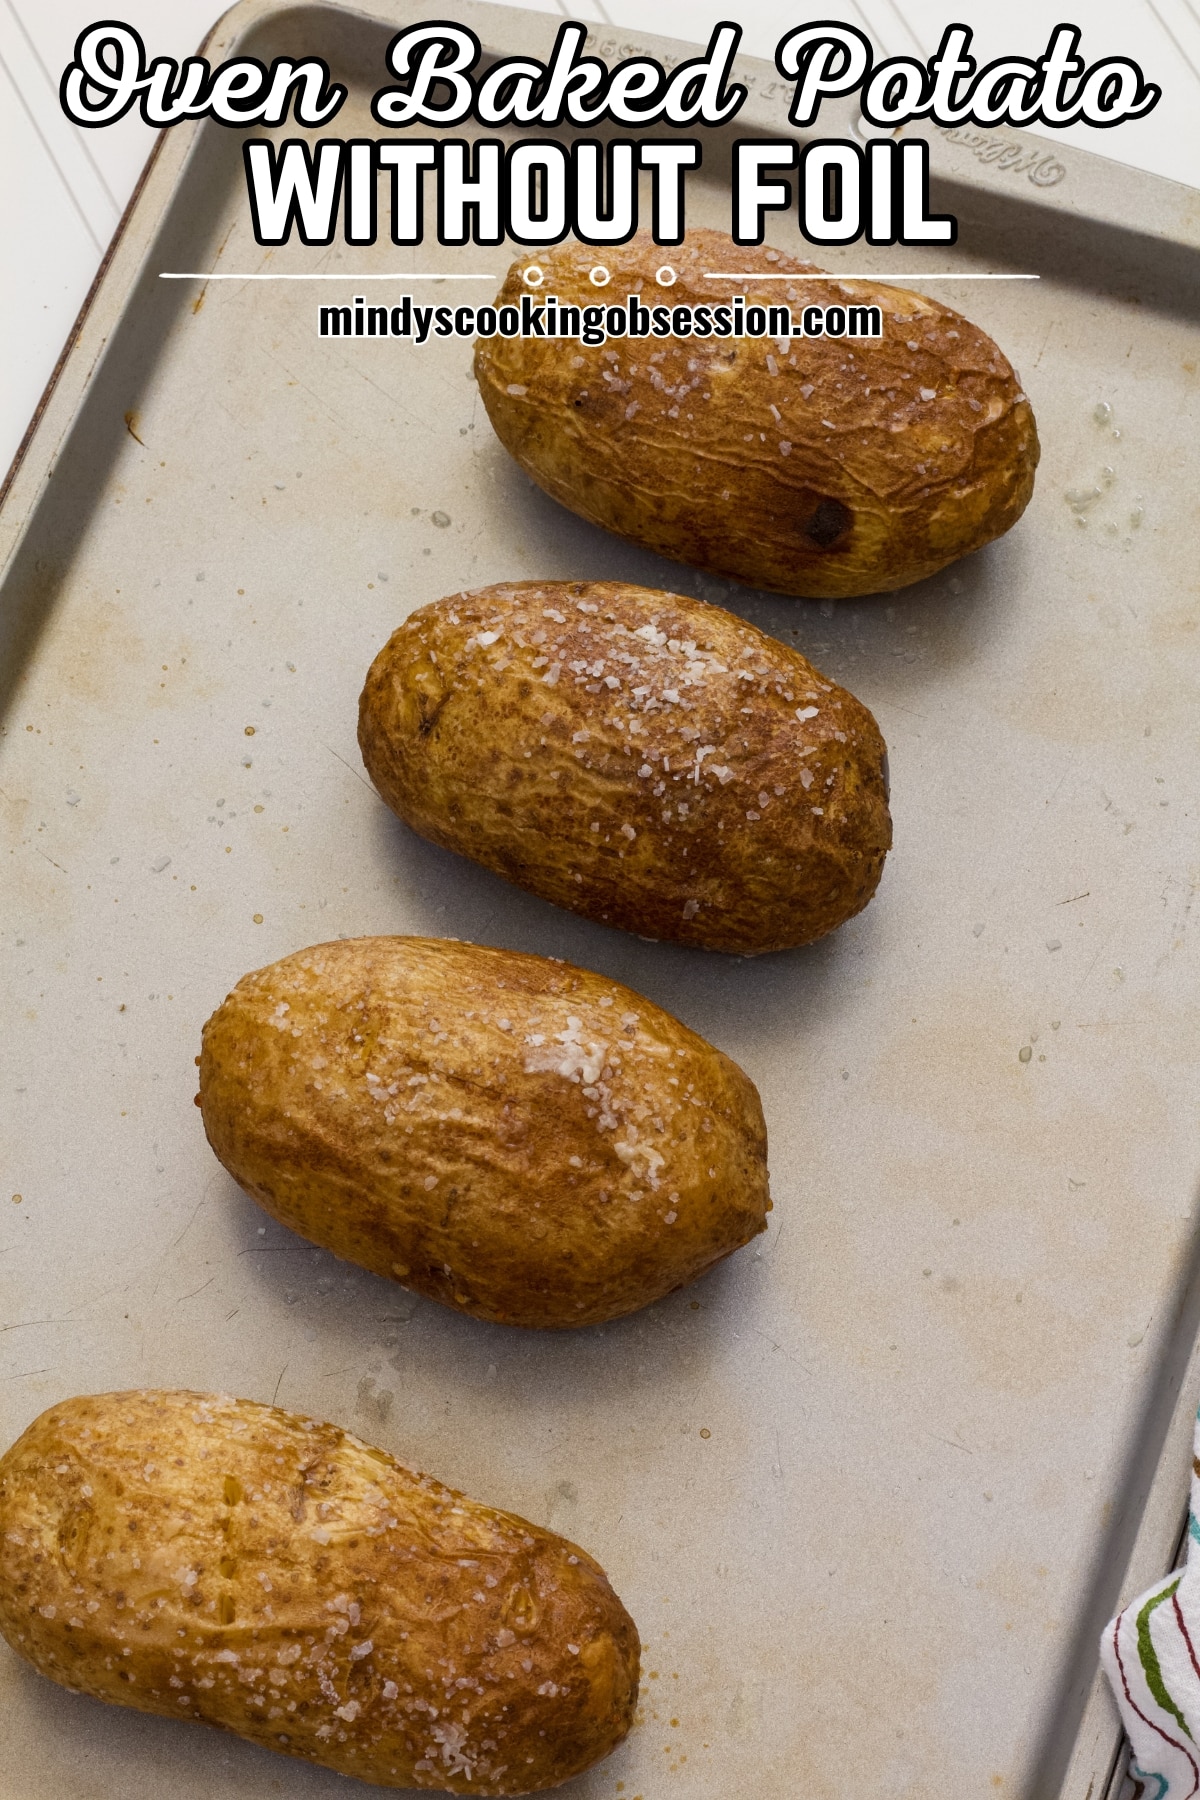 How to Make Perfect Baked Potato in Oven with No Foil - we show you how easy it is to make the best baked potato in the oven without any foil.  via @mindyscookingobsession